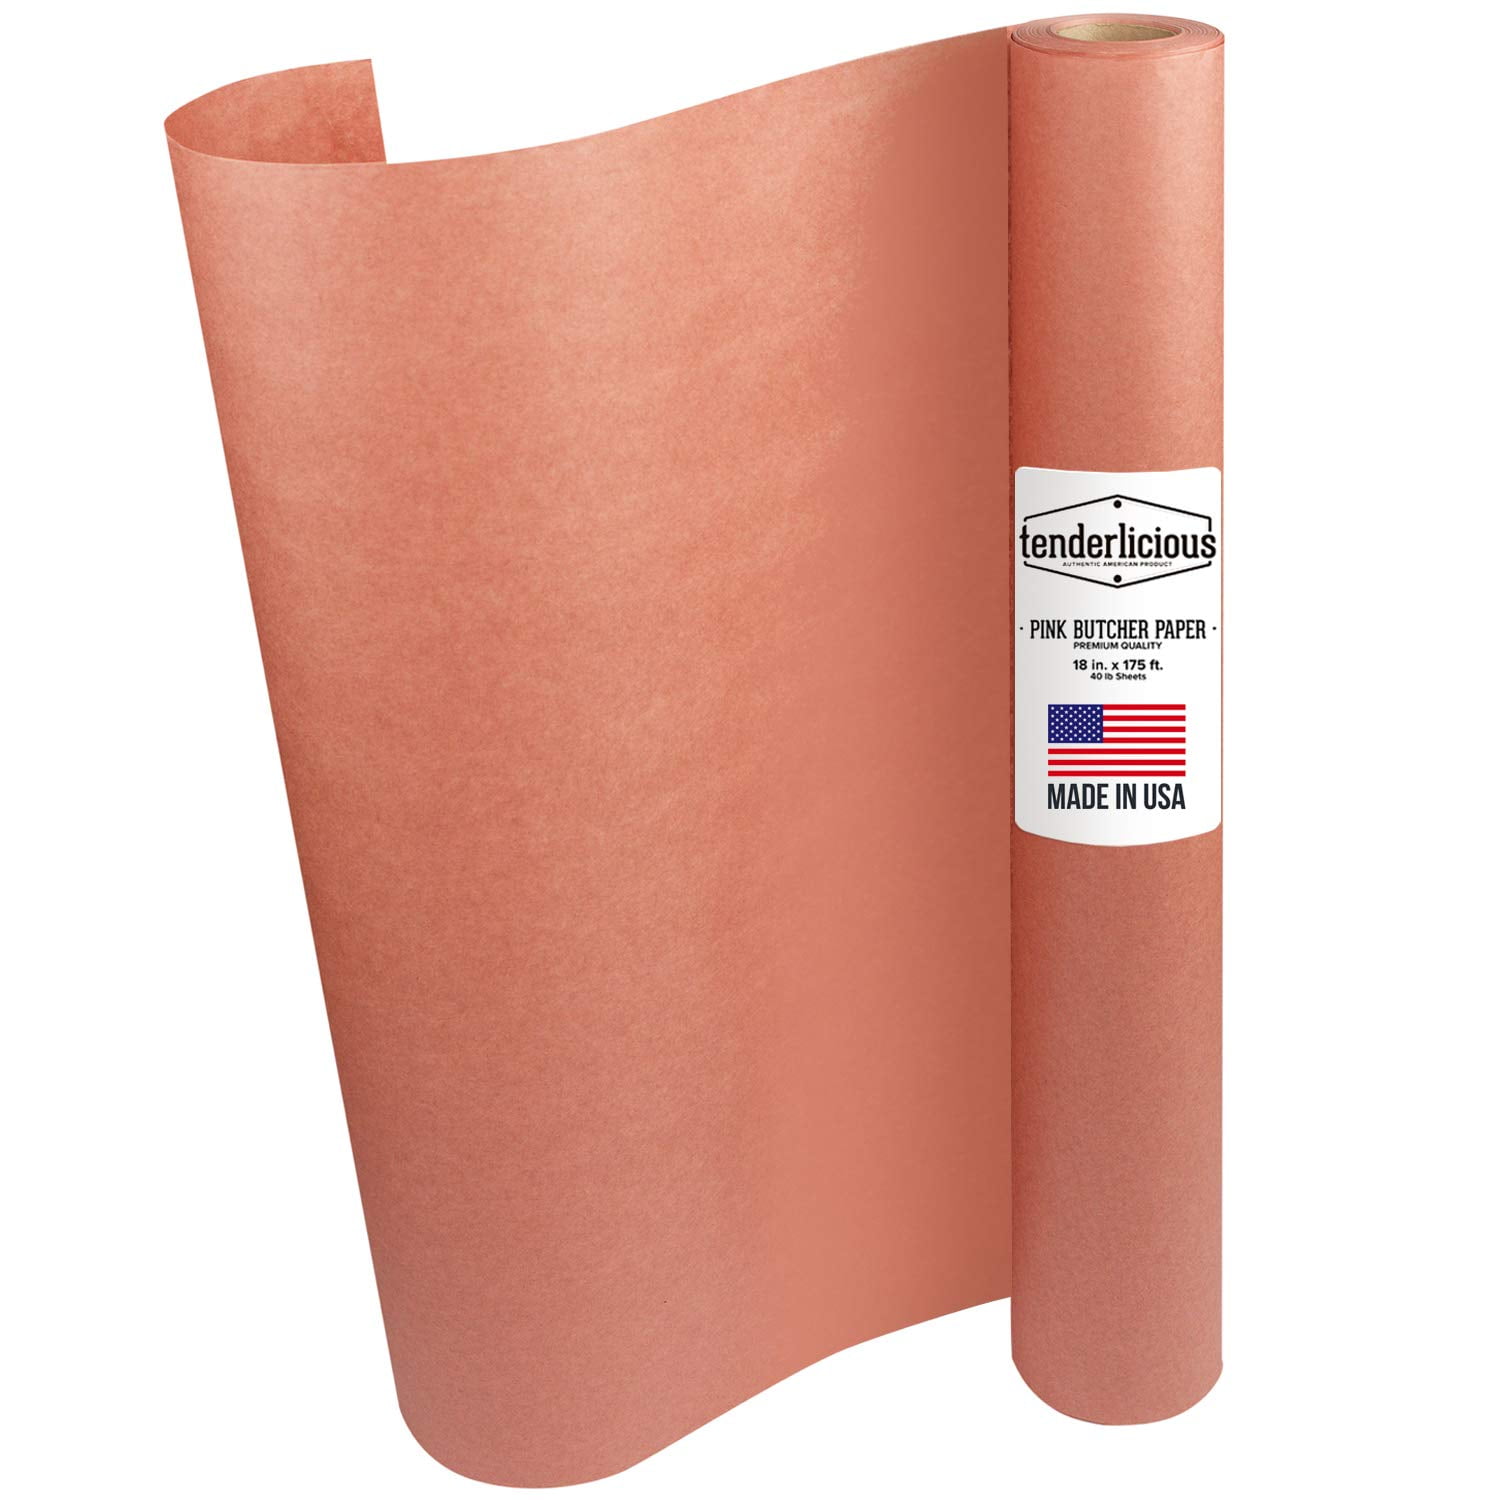 RW Base Pink / Peach 40# Butcher Paper Roll - 18 x 175' - 1 count